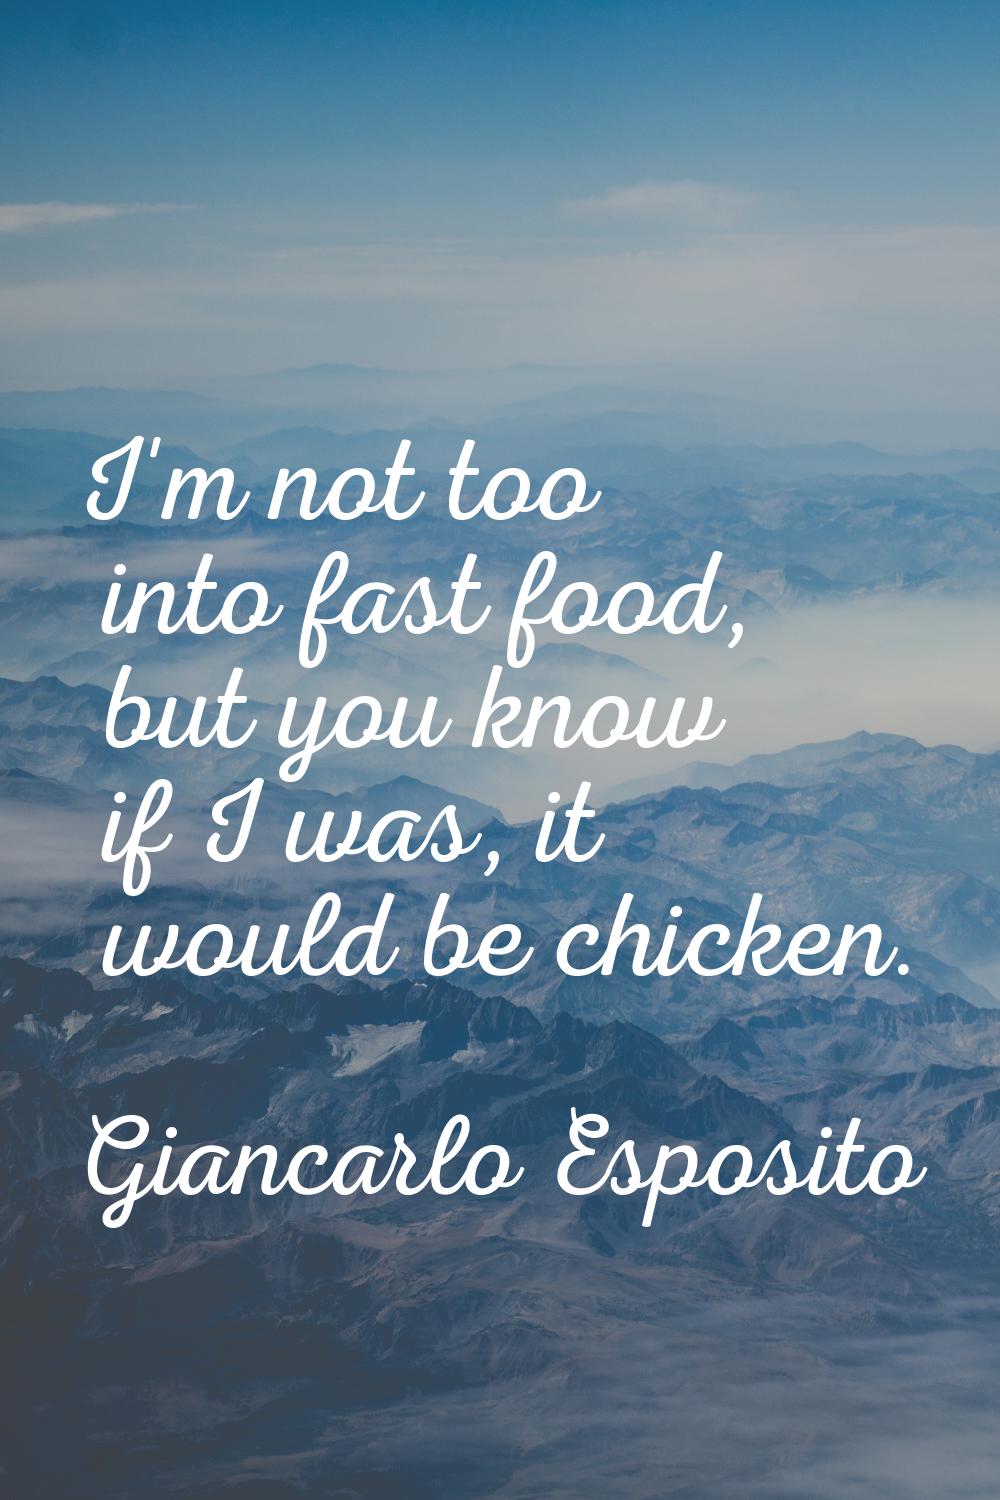 I'm not too into fast food, but you know if I was, it would be chicken.